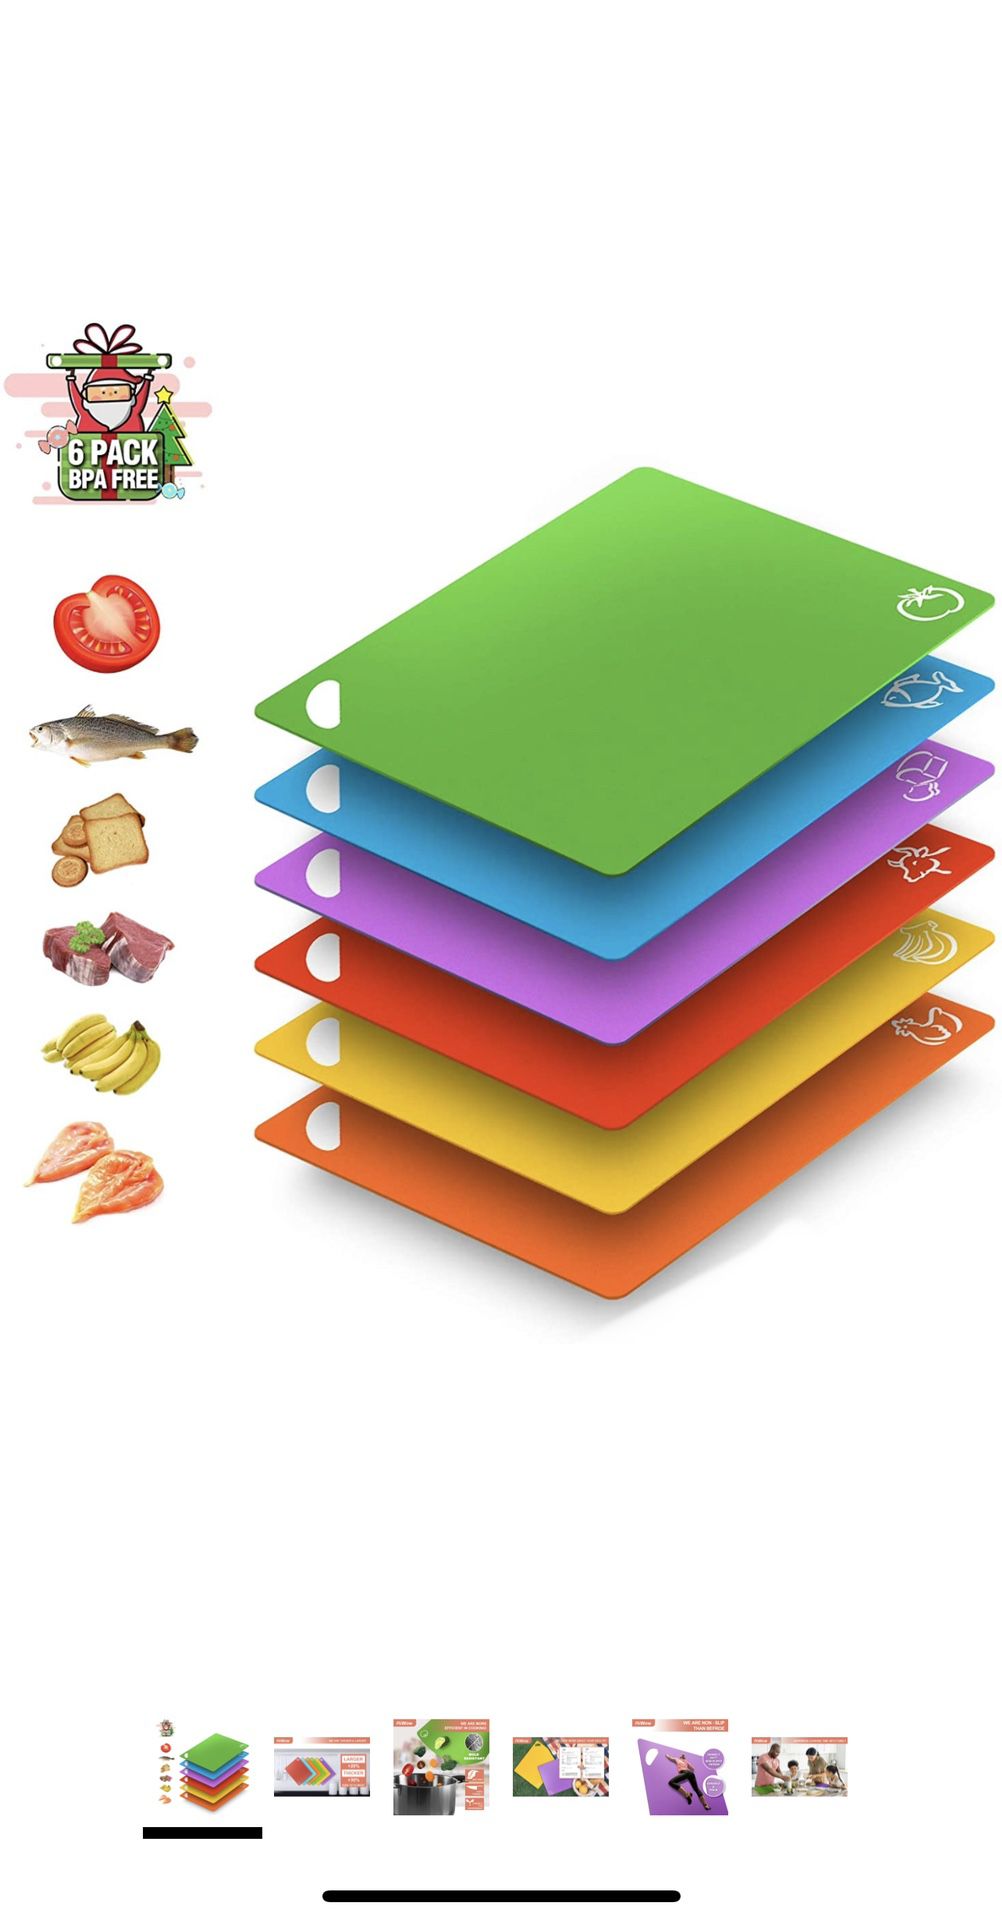 Amazon Brand Extra Flexible Plastic Cutting Board for Kitchen Dishwasher Safe Non-Slip Set of 6 Colors Code Large Thick BPA Free Plastic Cutting Mats-